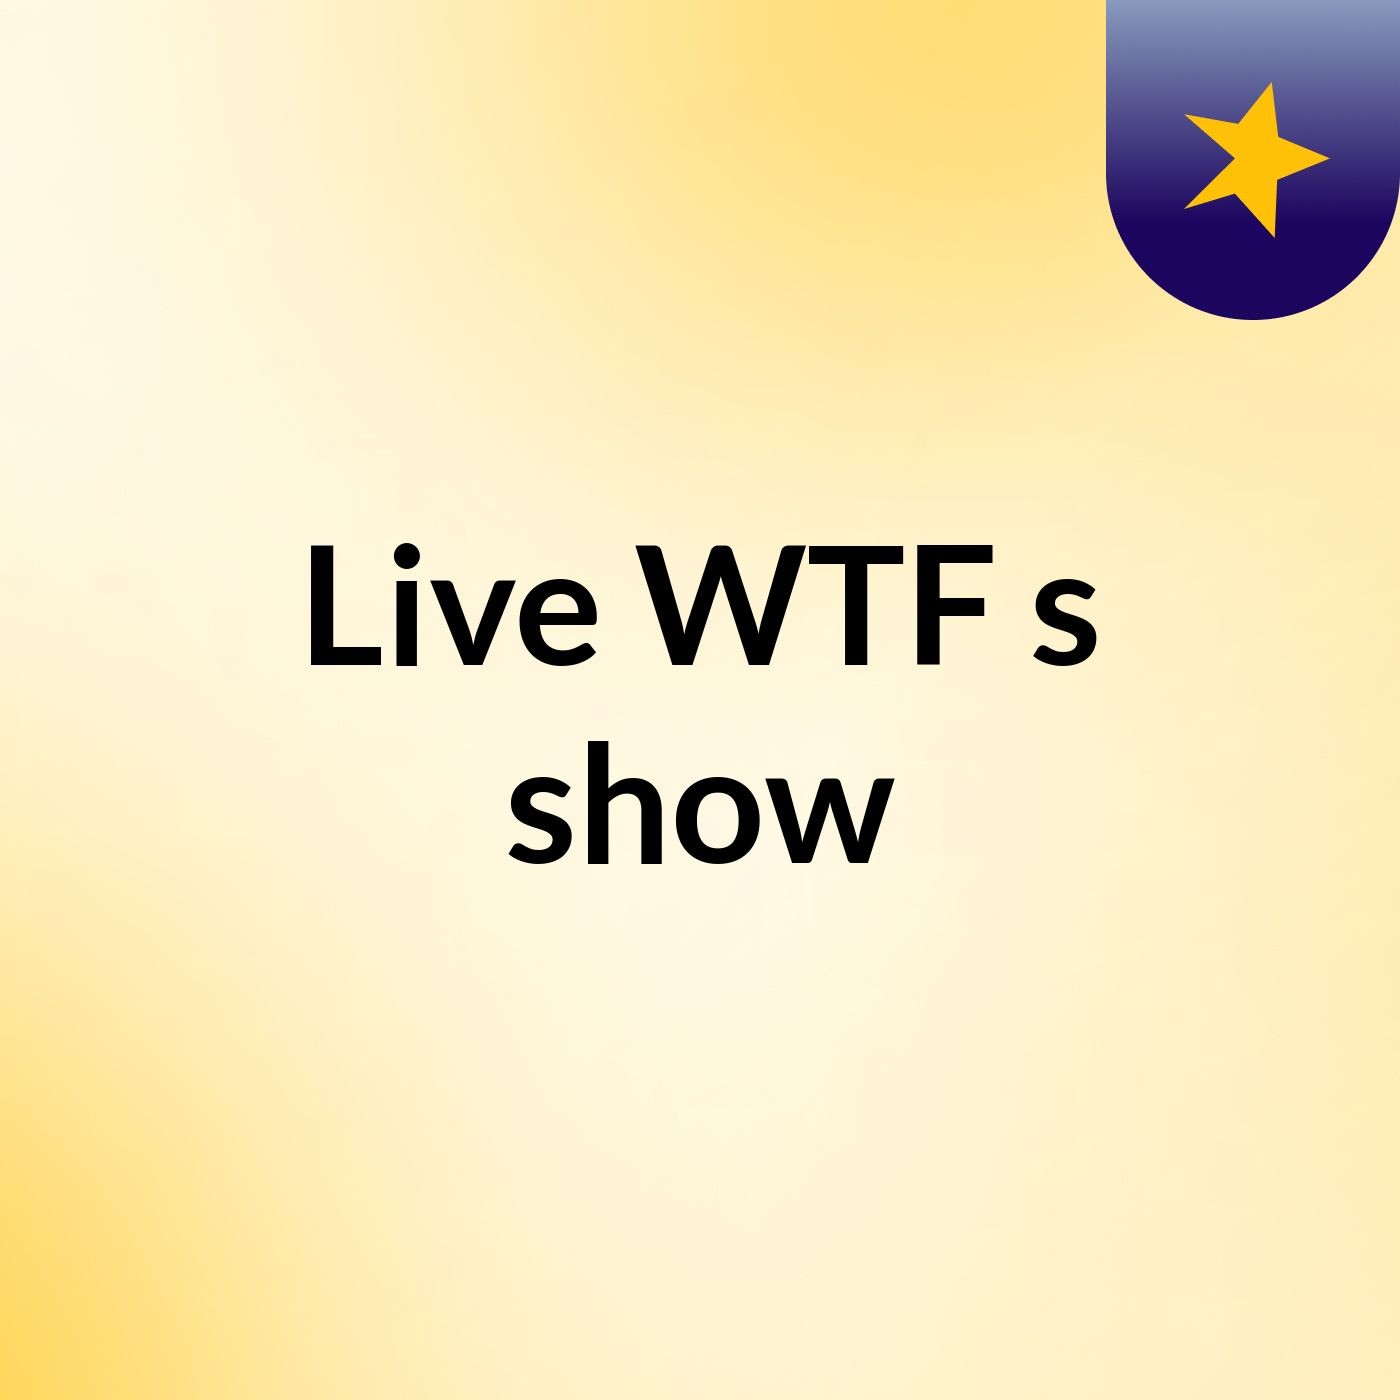 Live WTF's show